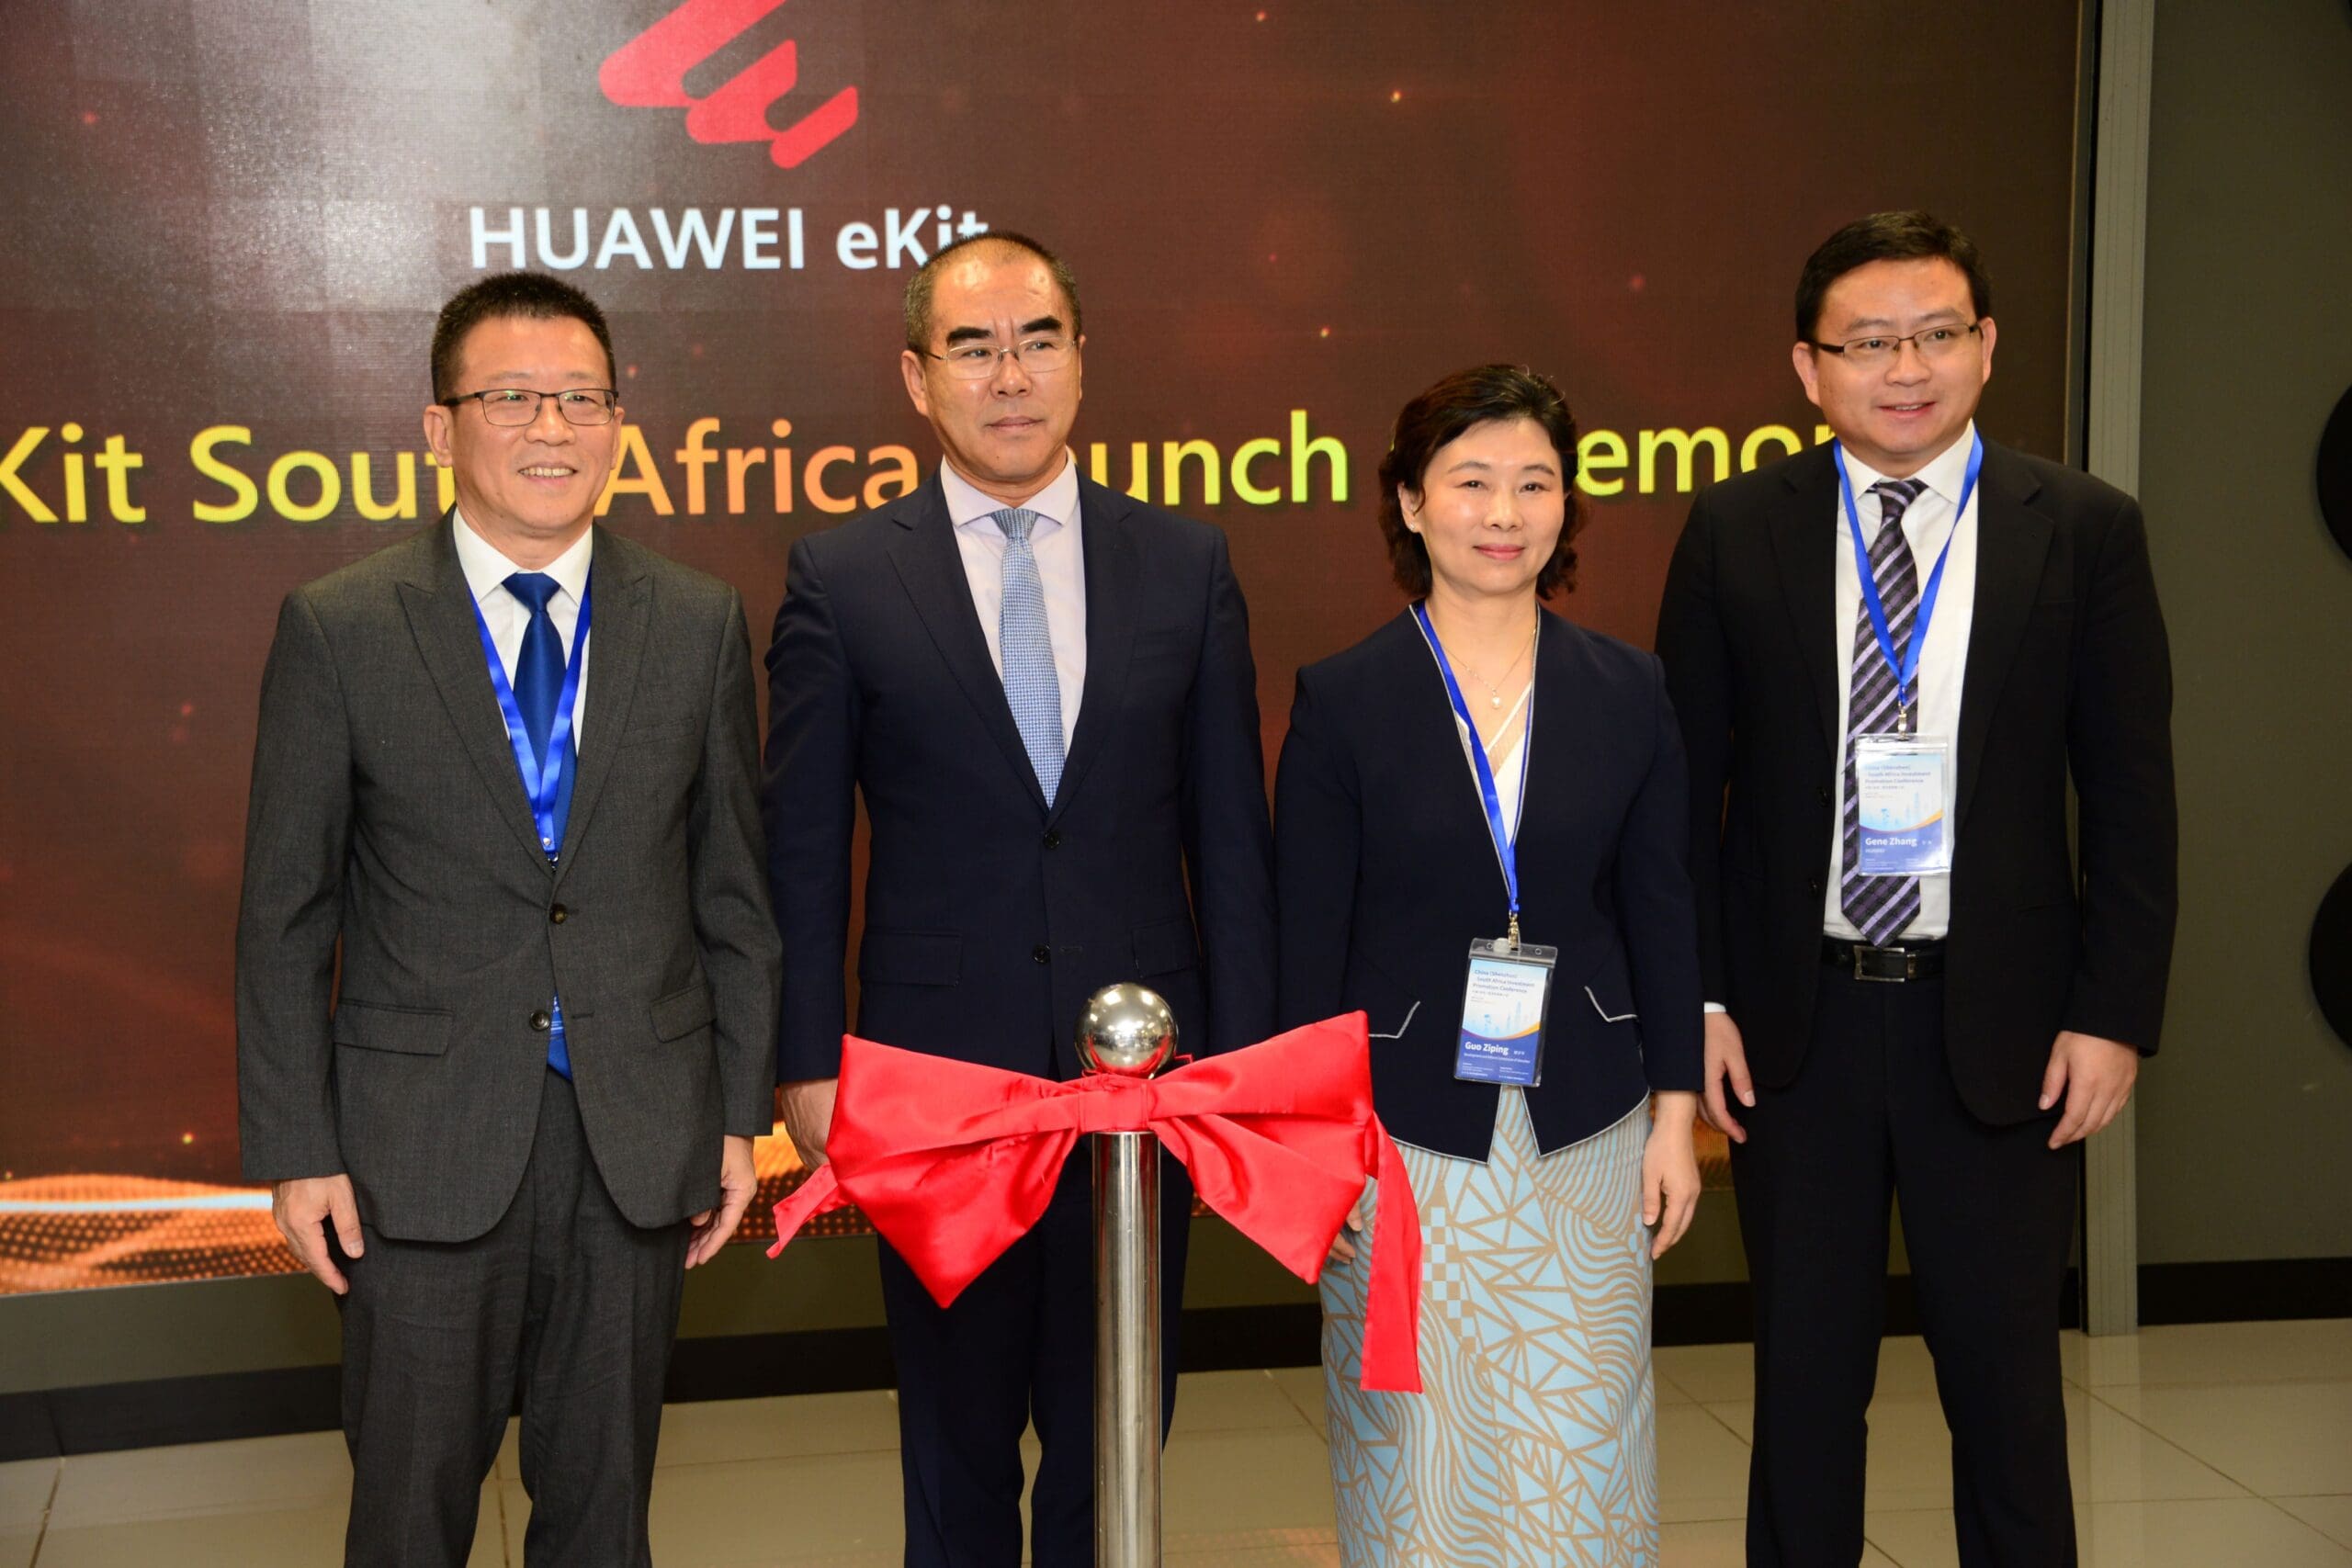 Huawei Launches eKit Brand For SMEs At The China (Shenzhen) – SA Investment Promotion Conference